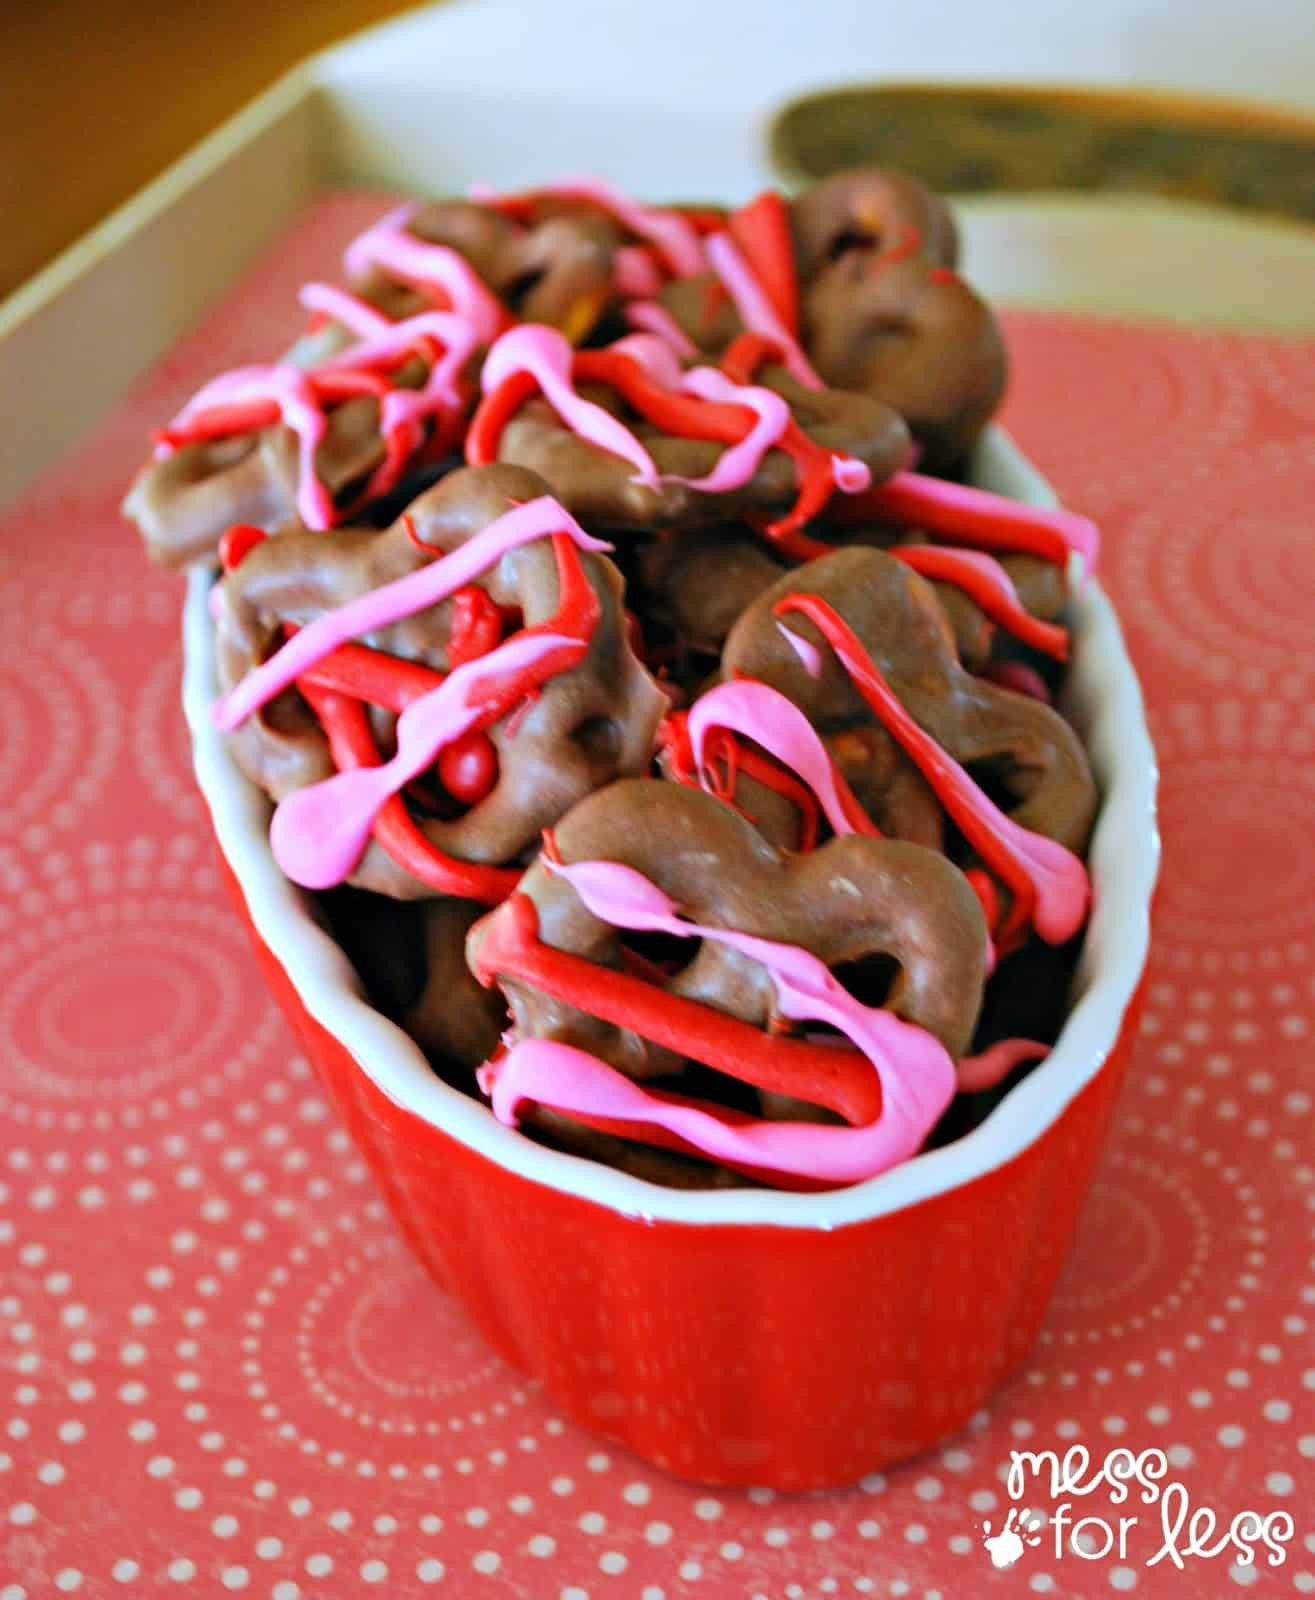 Valentine'S Day Chocolate Covered Pretzels
 How To Make Chocolate Covered Pretzels for Valentine s Day